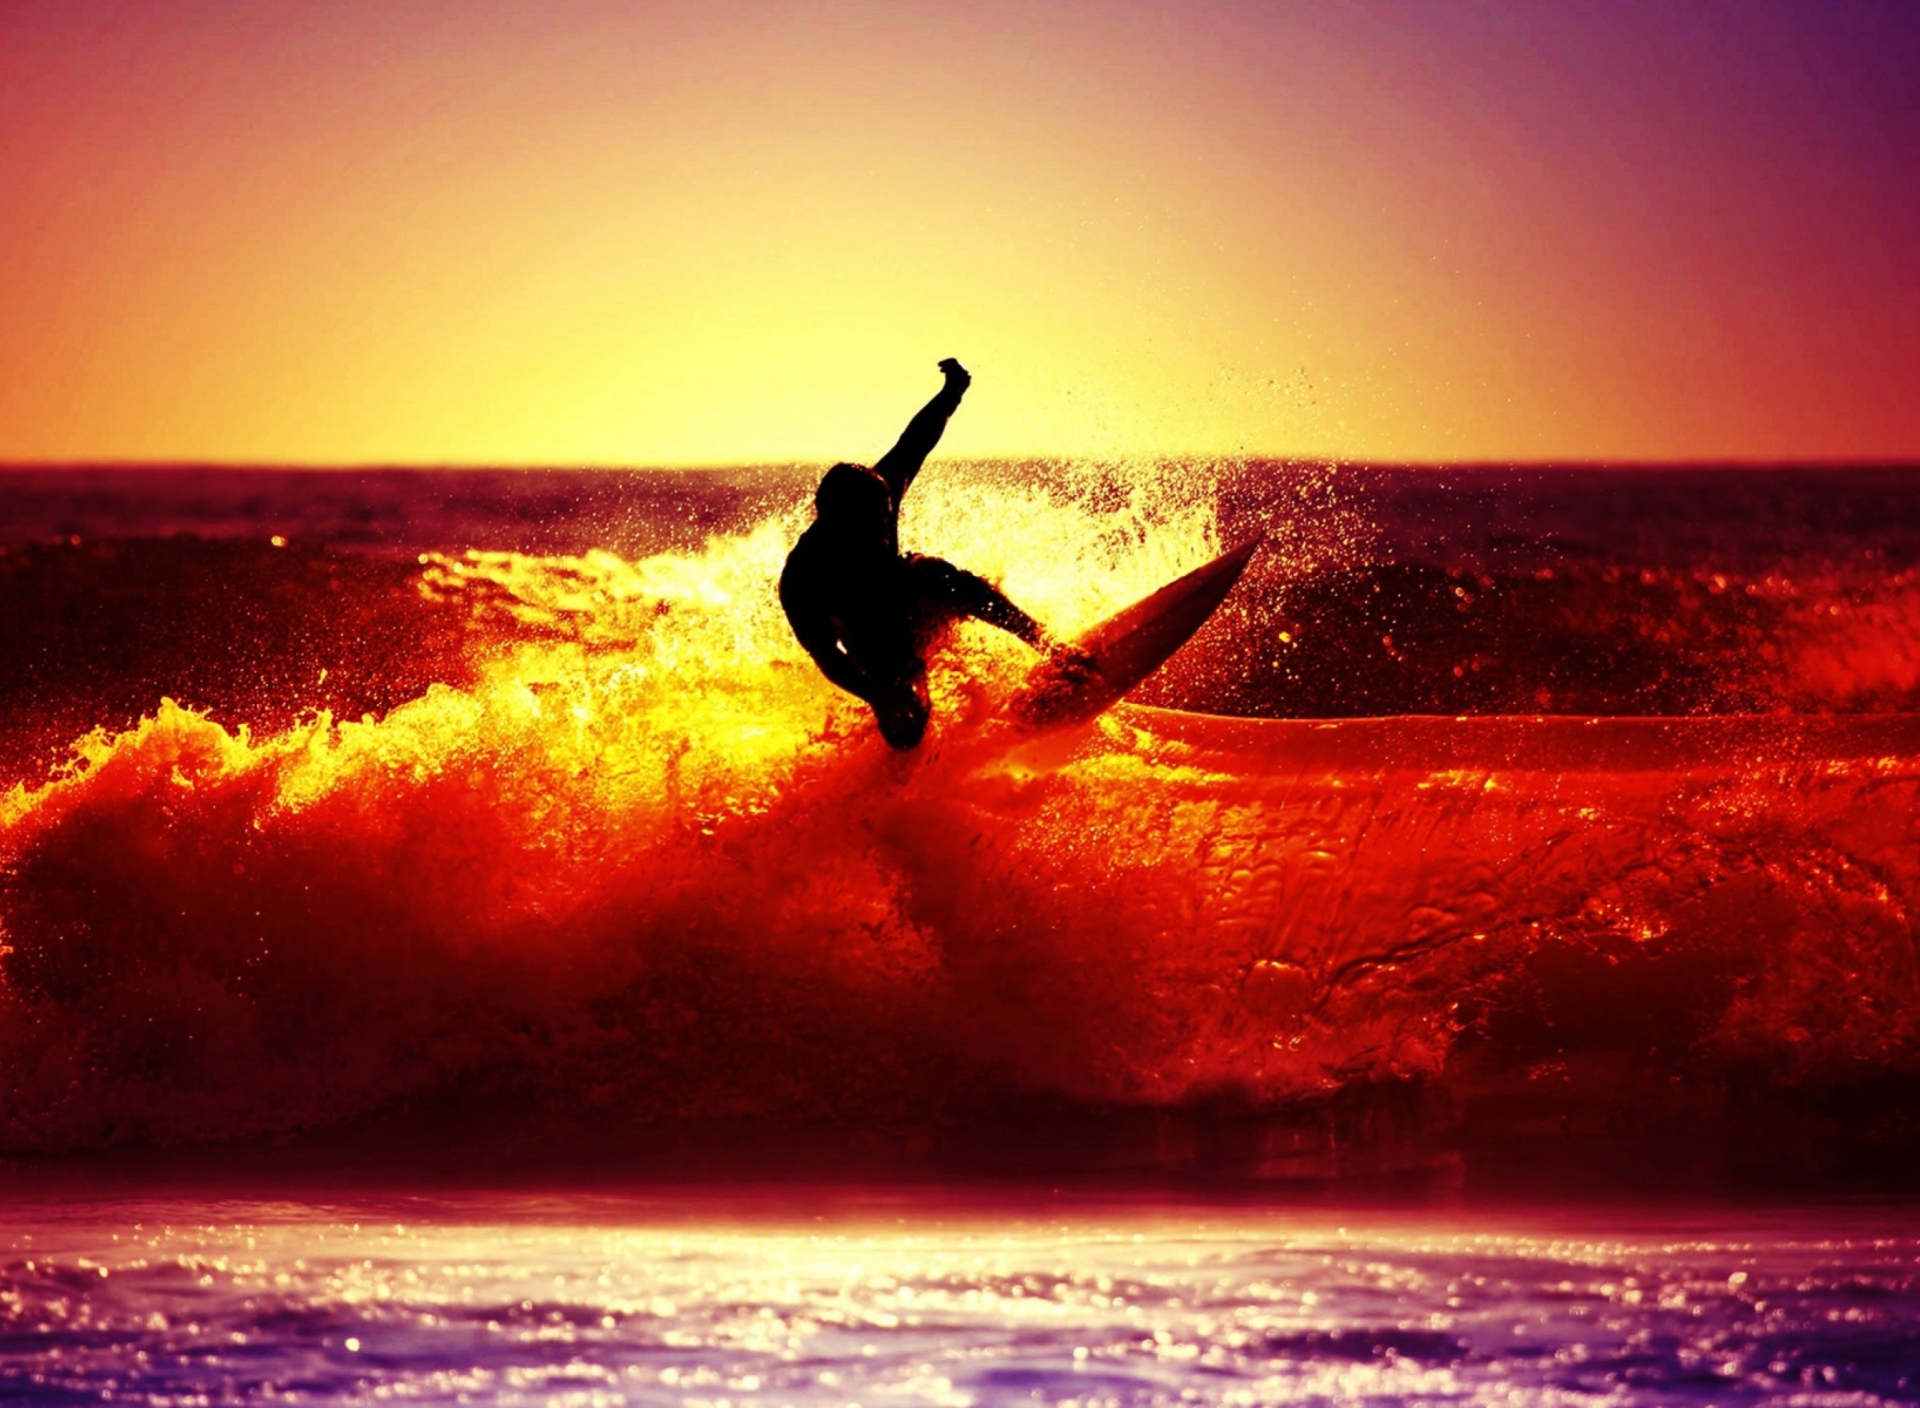 Surfing At Sunset wallpaper 1920x1408